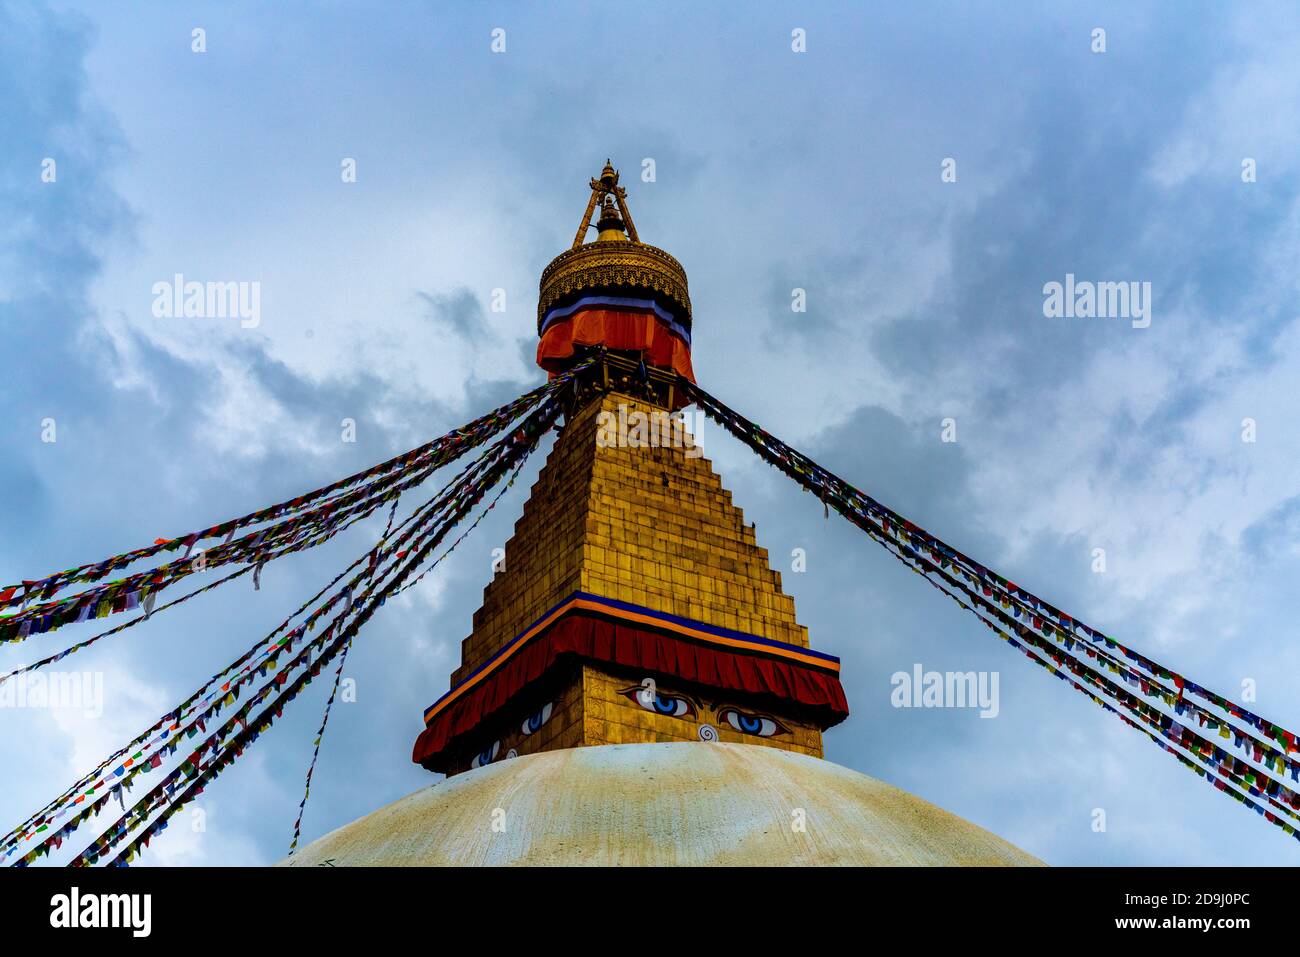 In this undated photo, the scenery of Bouddha Stupa, one of the largest stupas in the world, stands tranquilly in the outskirts of Kathmandu, Nepal. Stock Photo